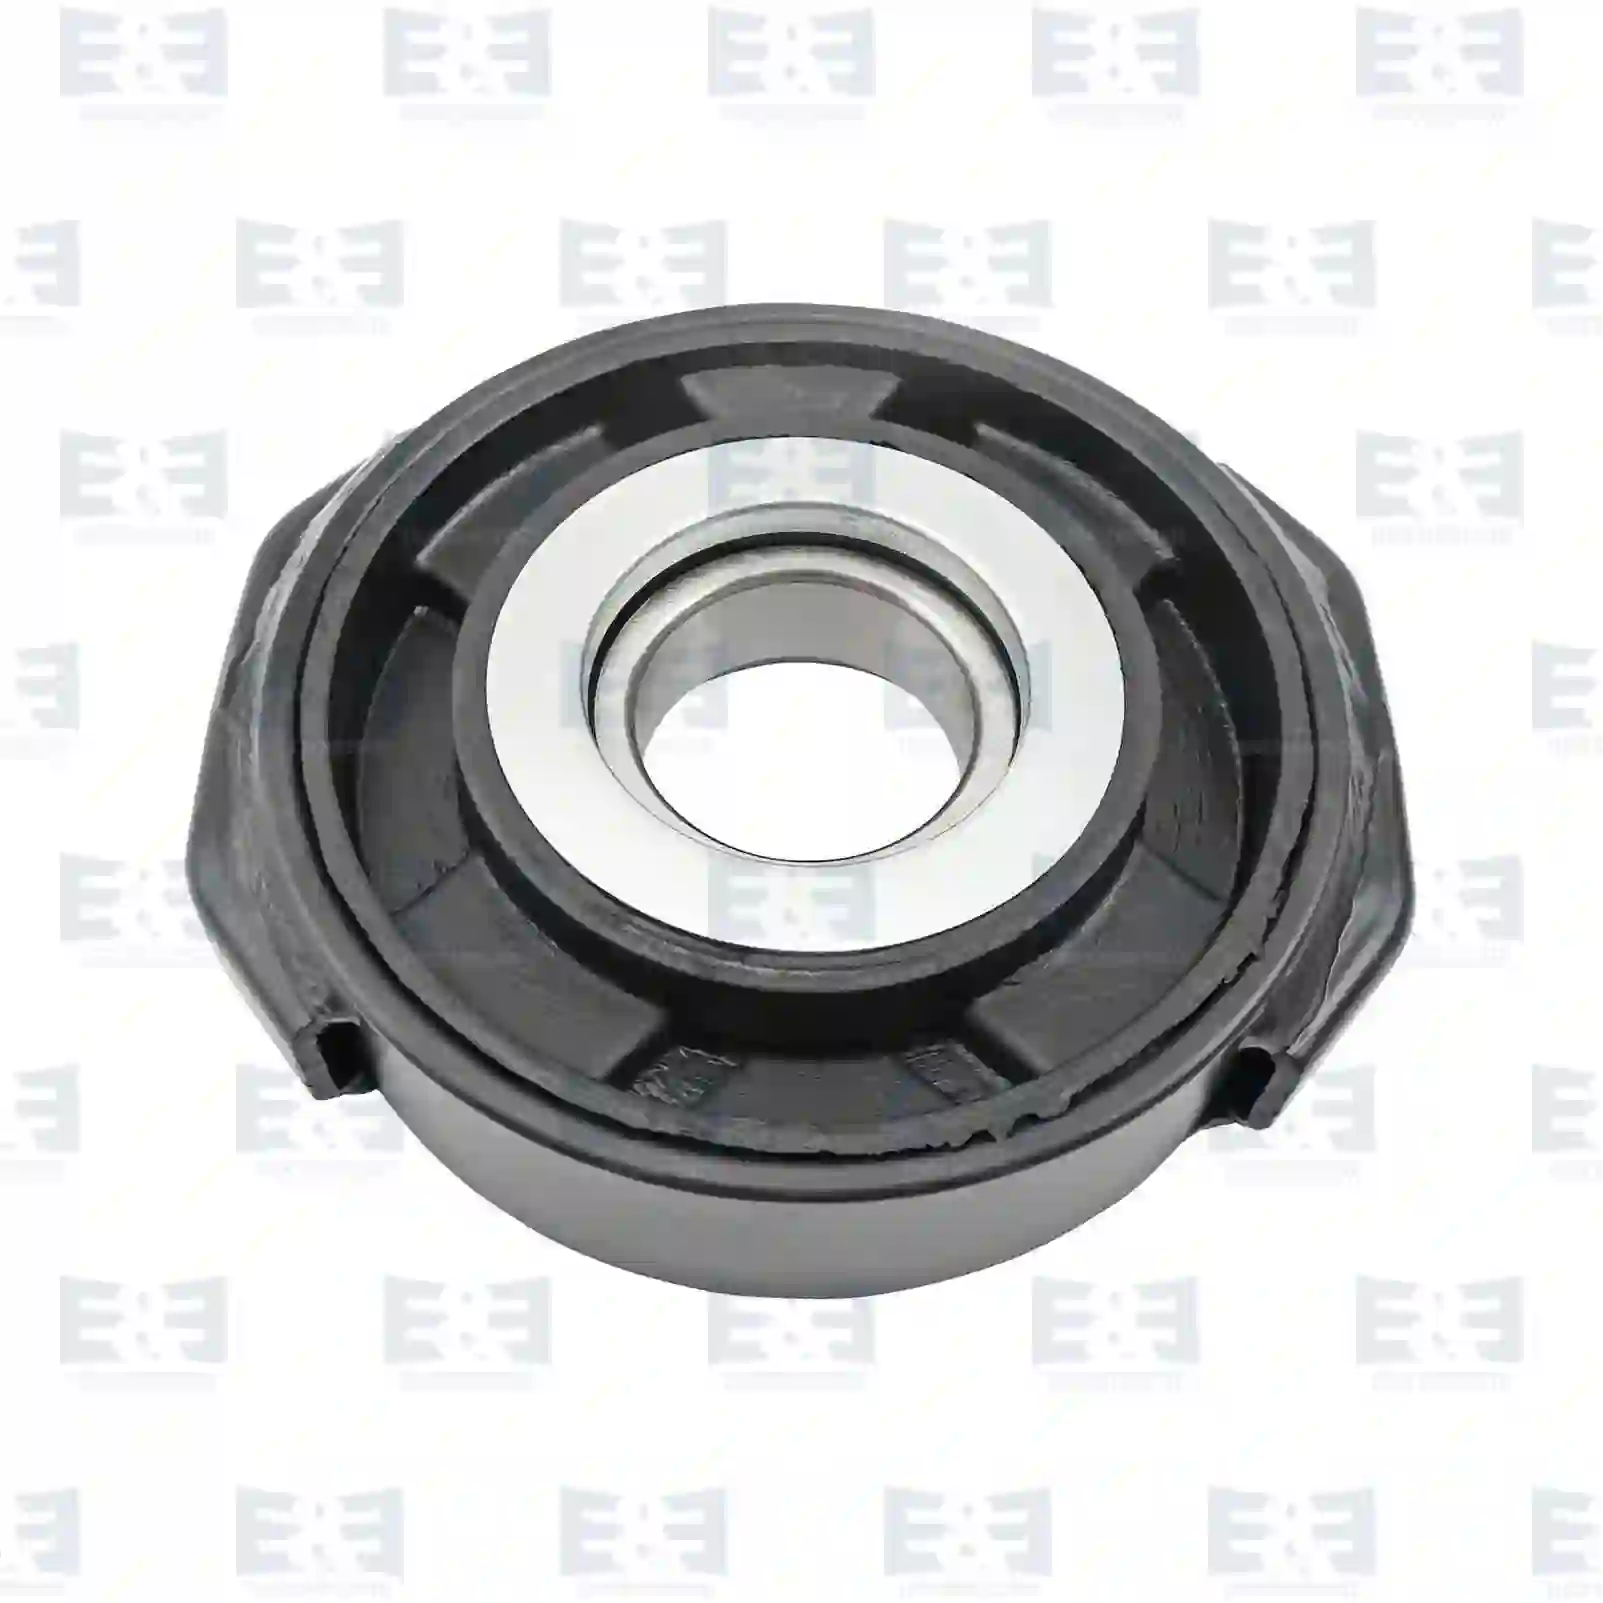 Support Bearing Center bearing, EE No 2E2276855 ,  oem no:9734100022 E&E Truck Spare Parts | Truck Spare Parts, Auotomotive Spare Parts